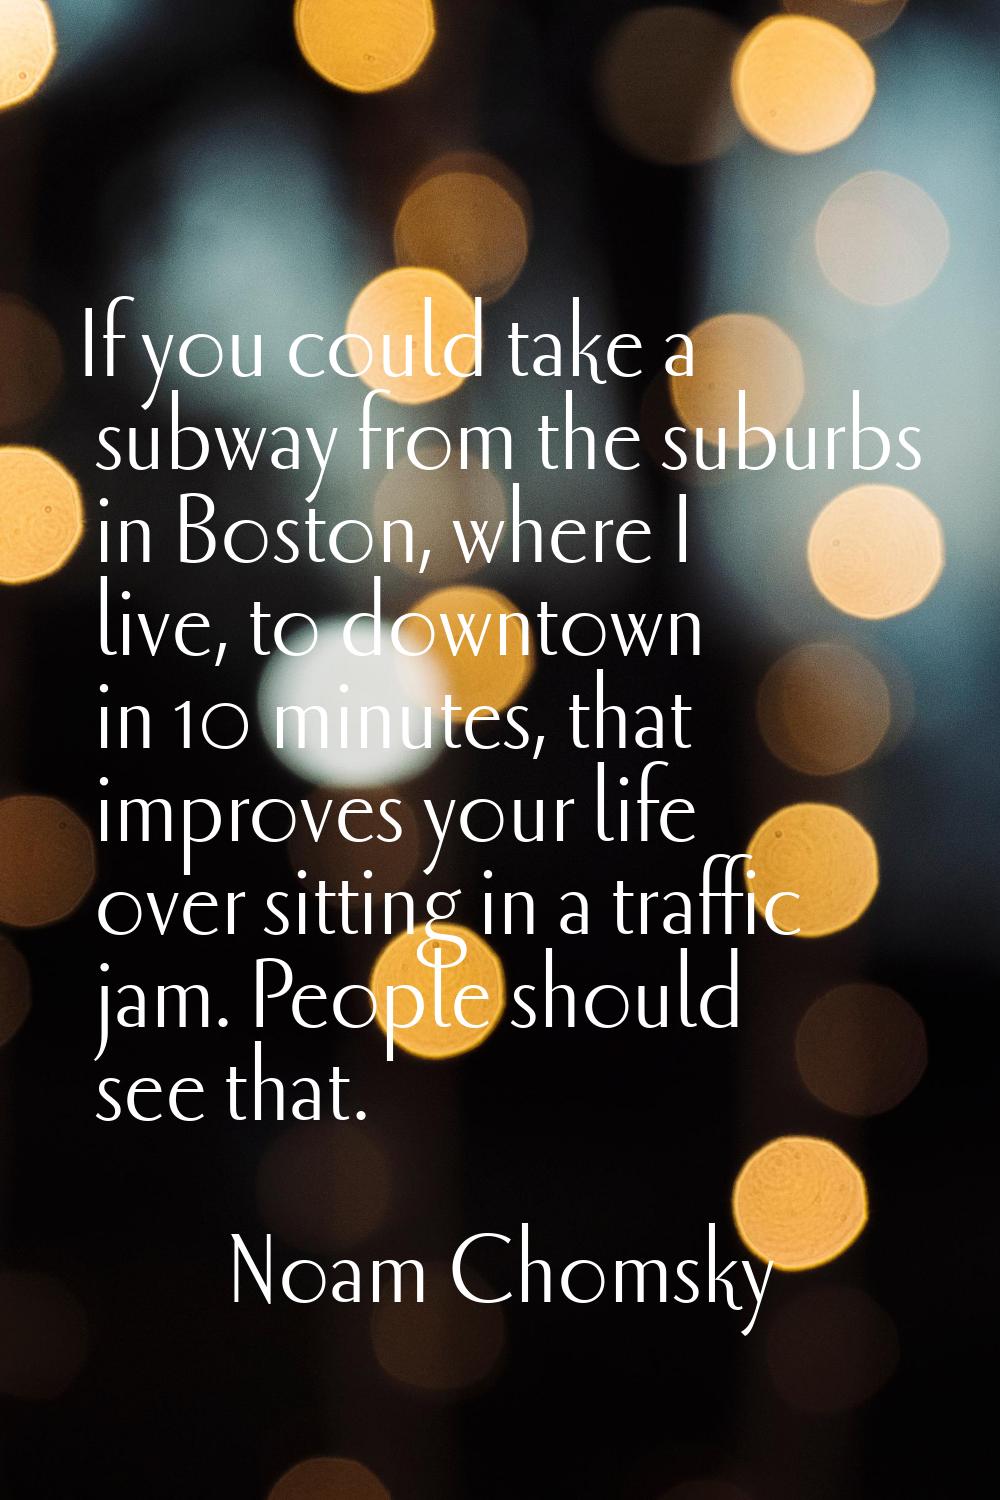 If you could take a subway from the suburbs in Boston, where I live, to downtown in 10 minutes, tha